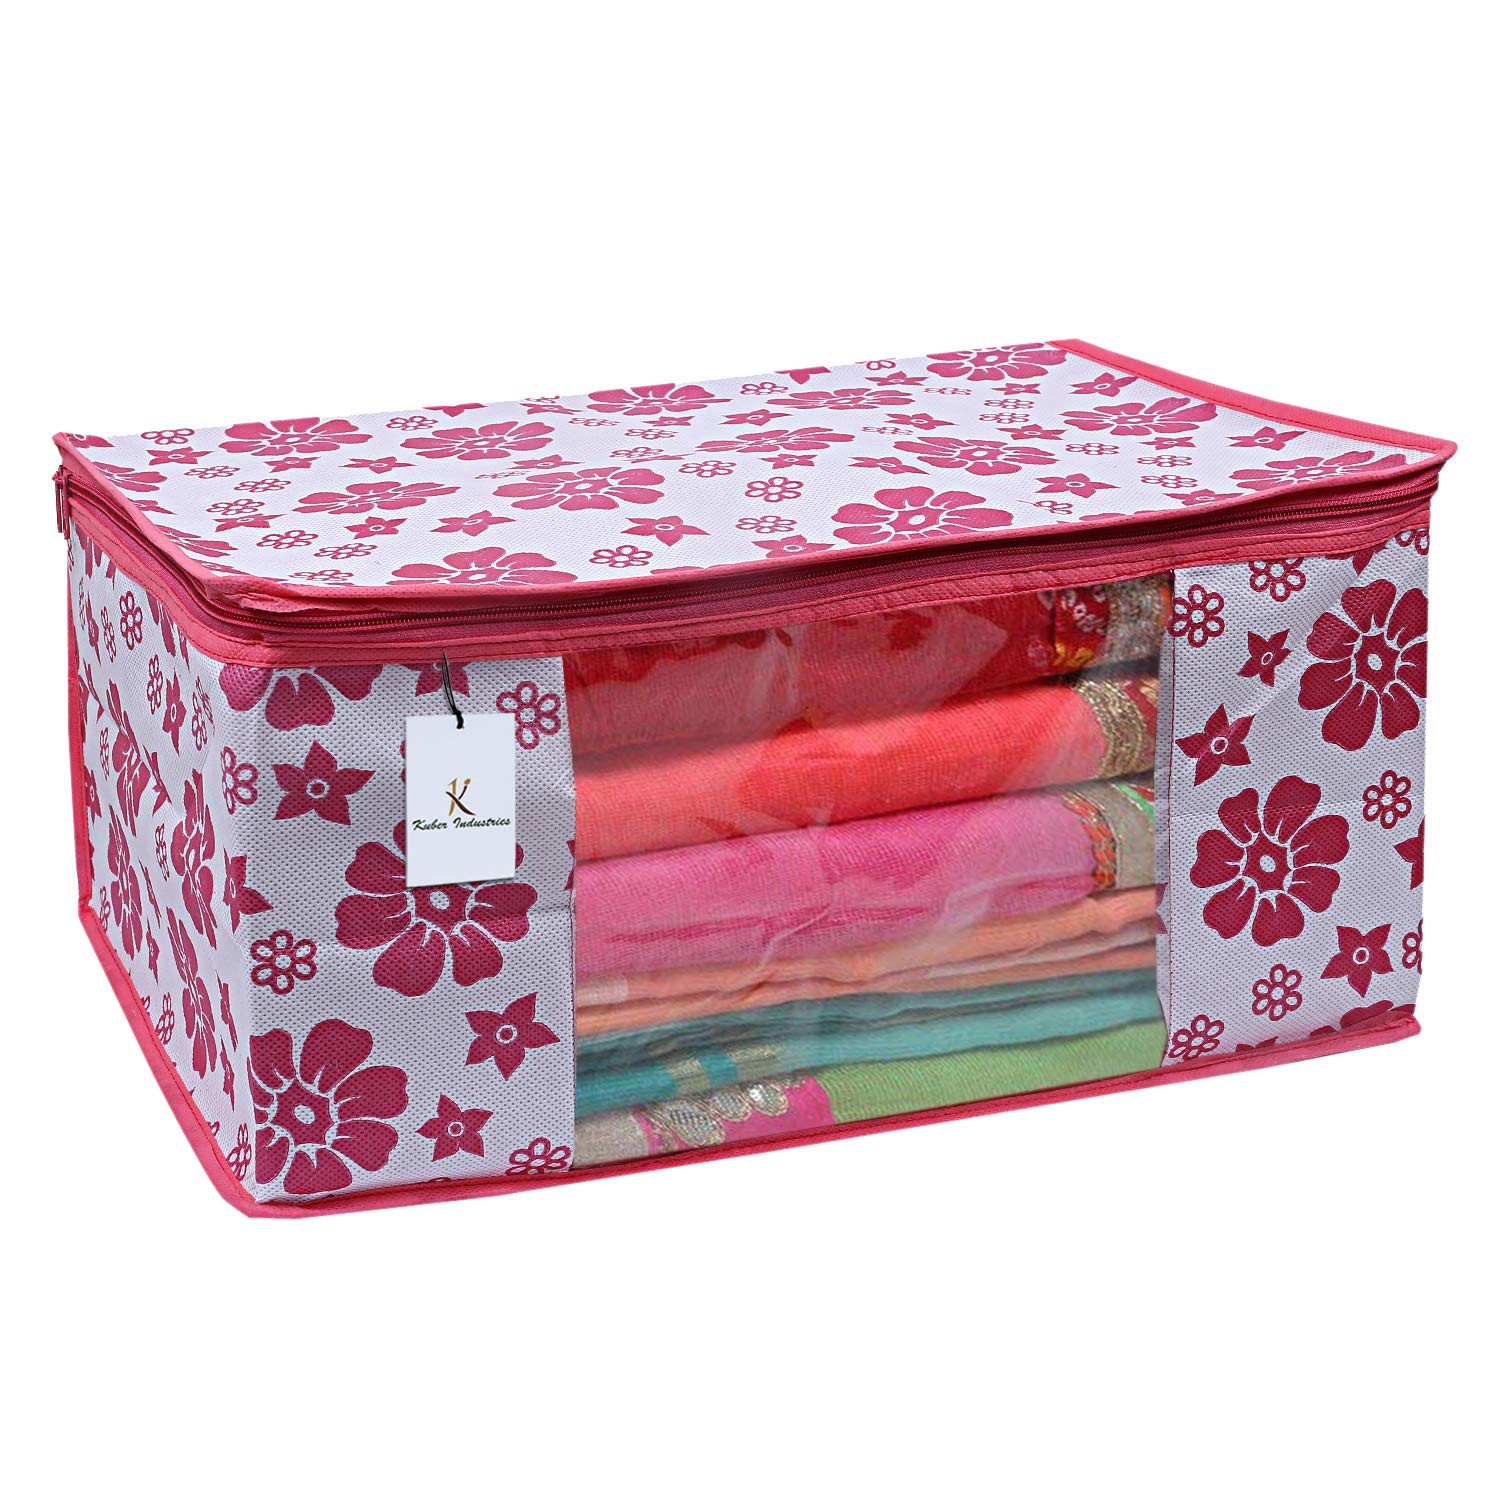 Kuber Industries Flower Printed Non Woven Fabric Saree Cover Set with Transparent Window, Extra Large, Pink & Blue & Ivory Red -CTKTC40803